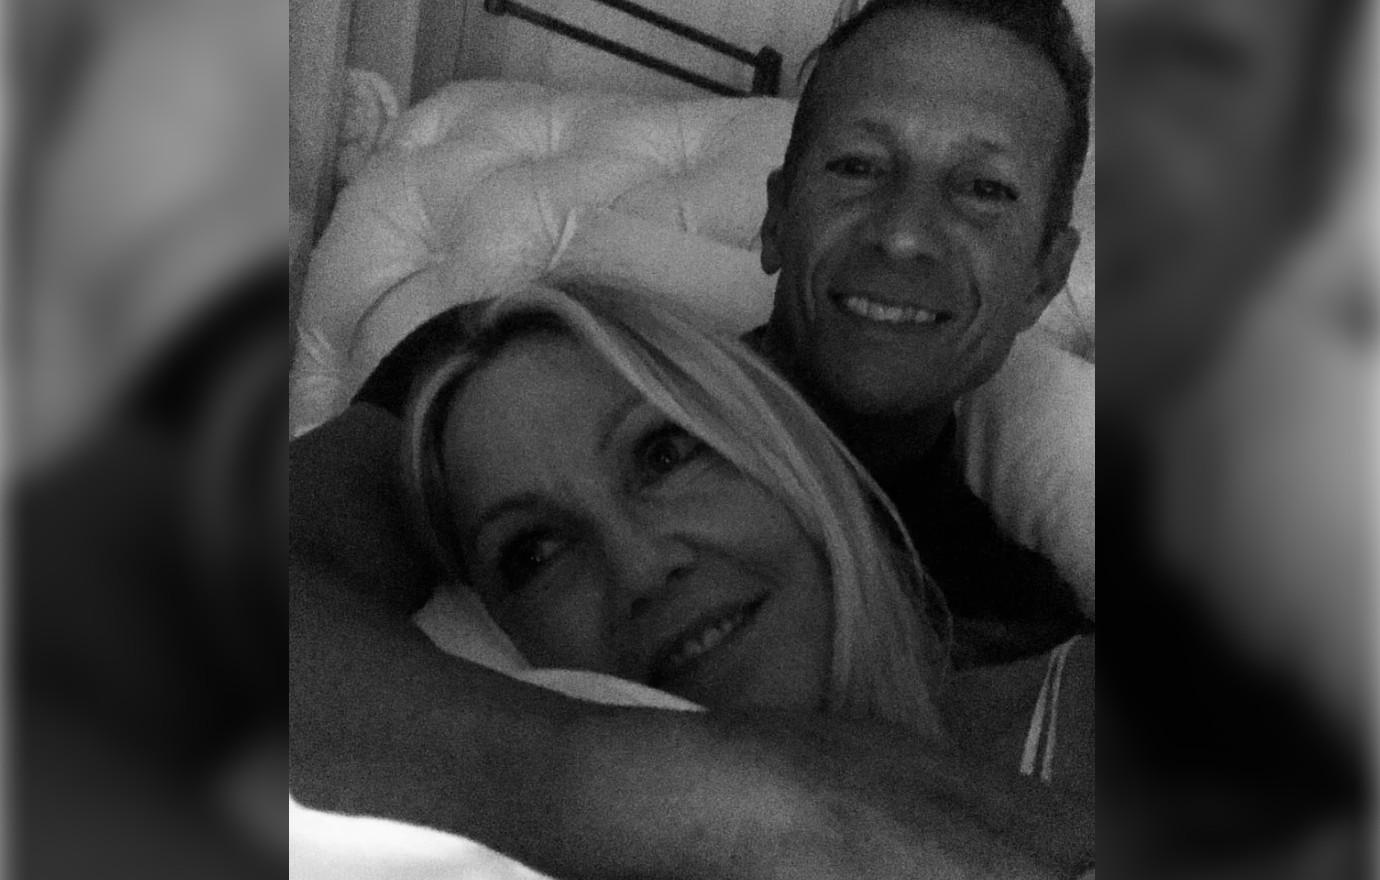 Heather Locklear and Chris Heisser Yet to Marry After 3-Year Engagement He Isnt Ready photo photo